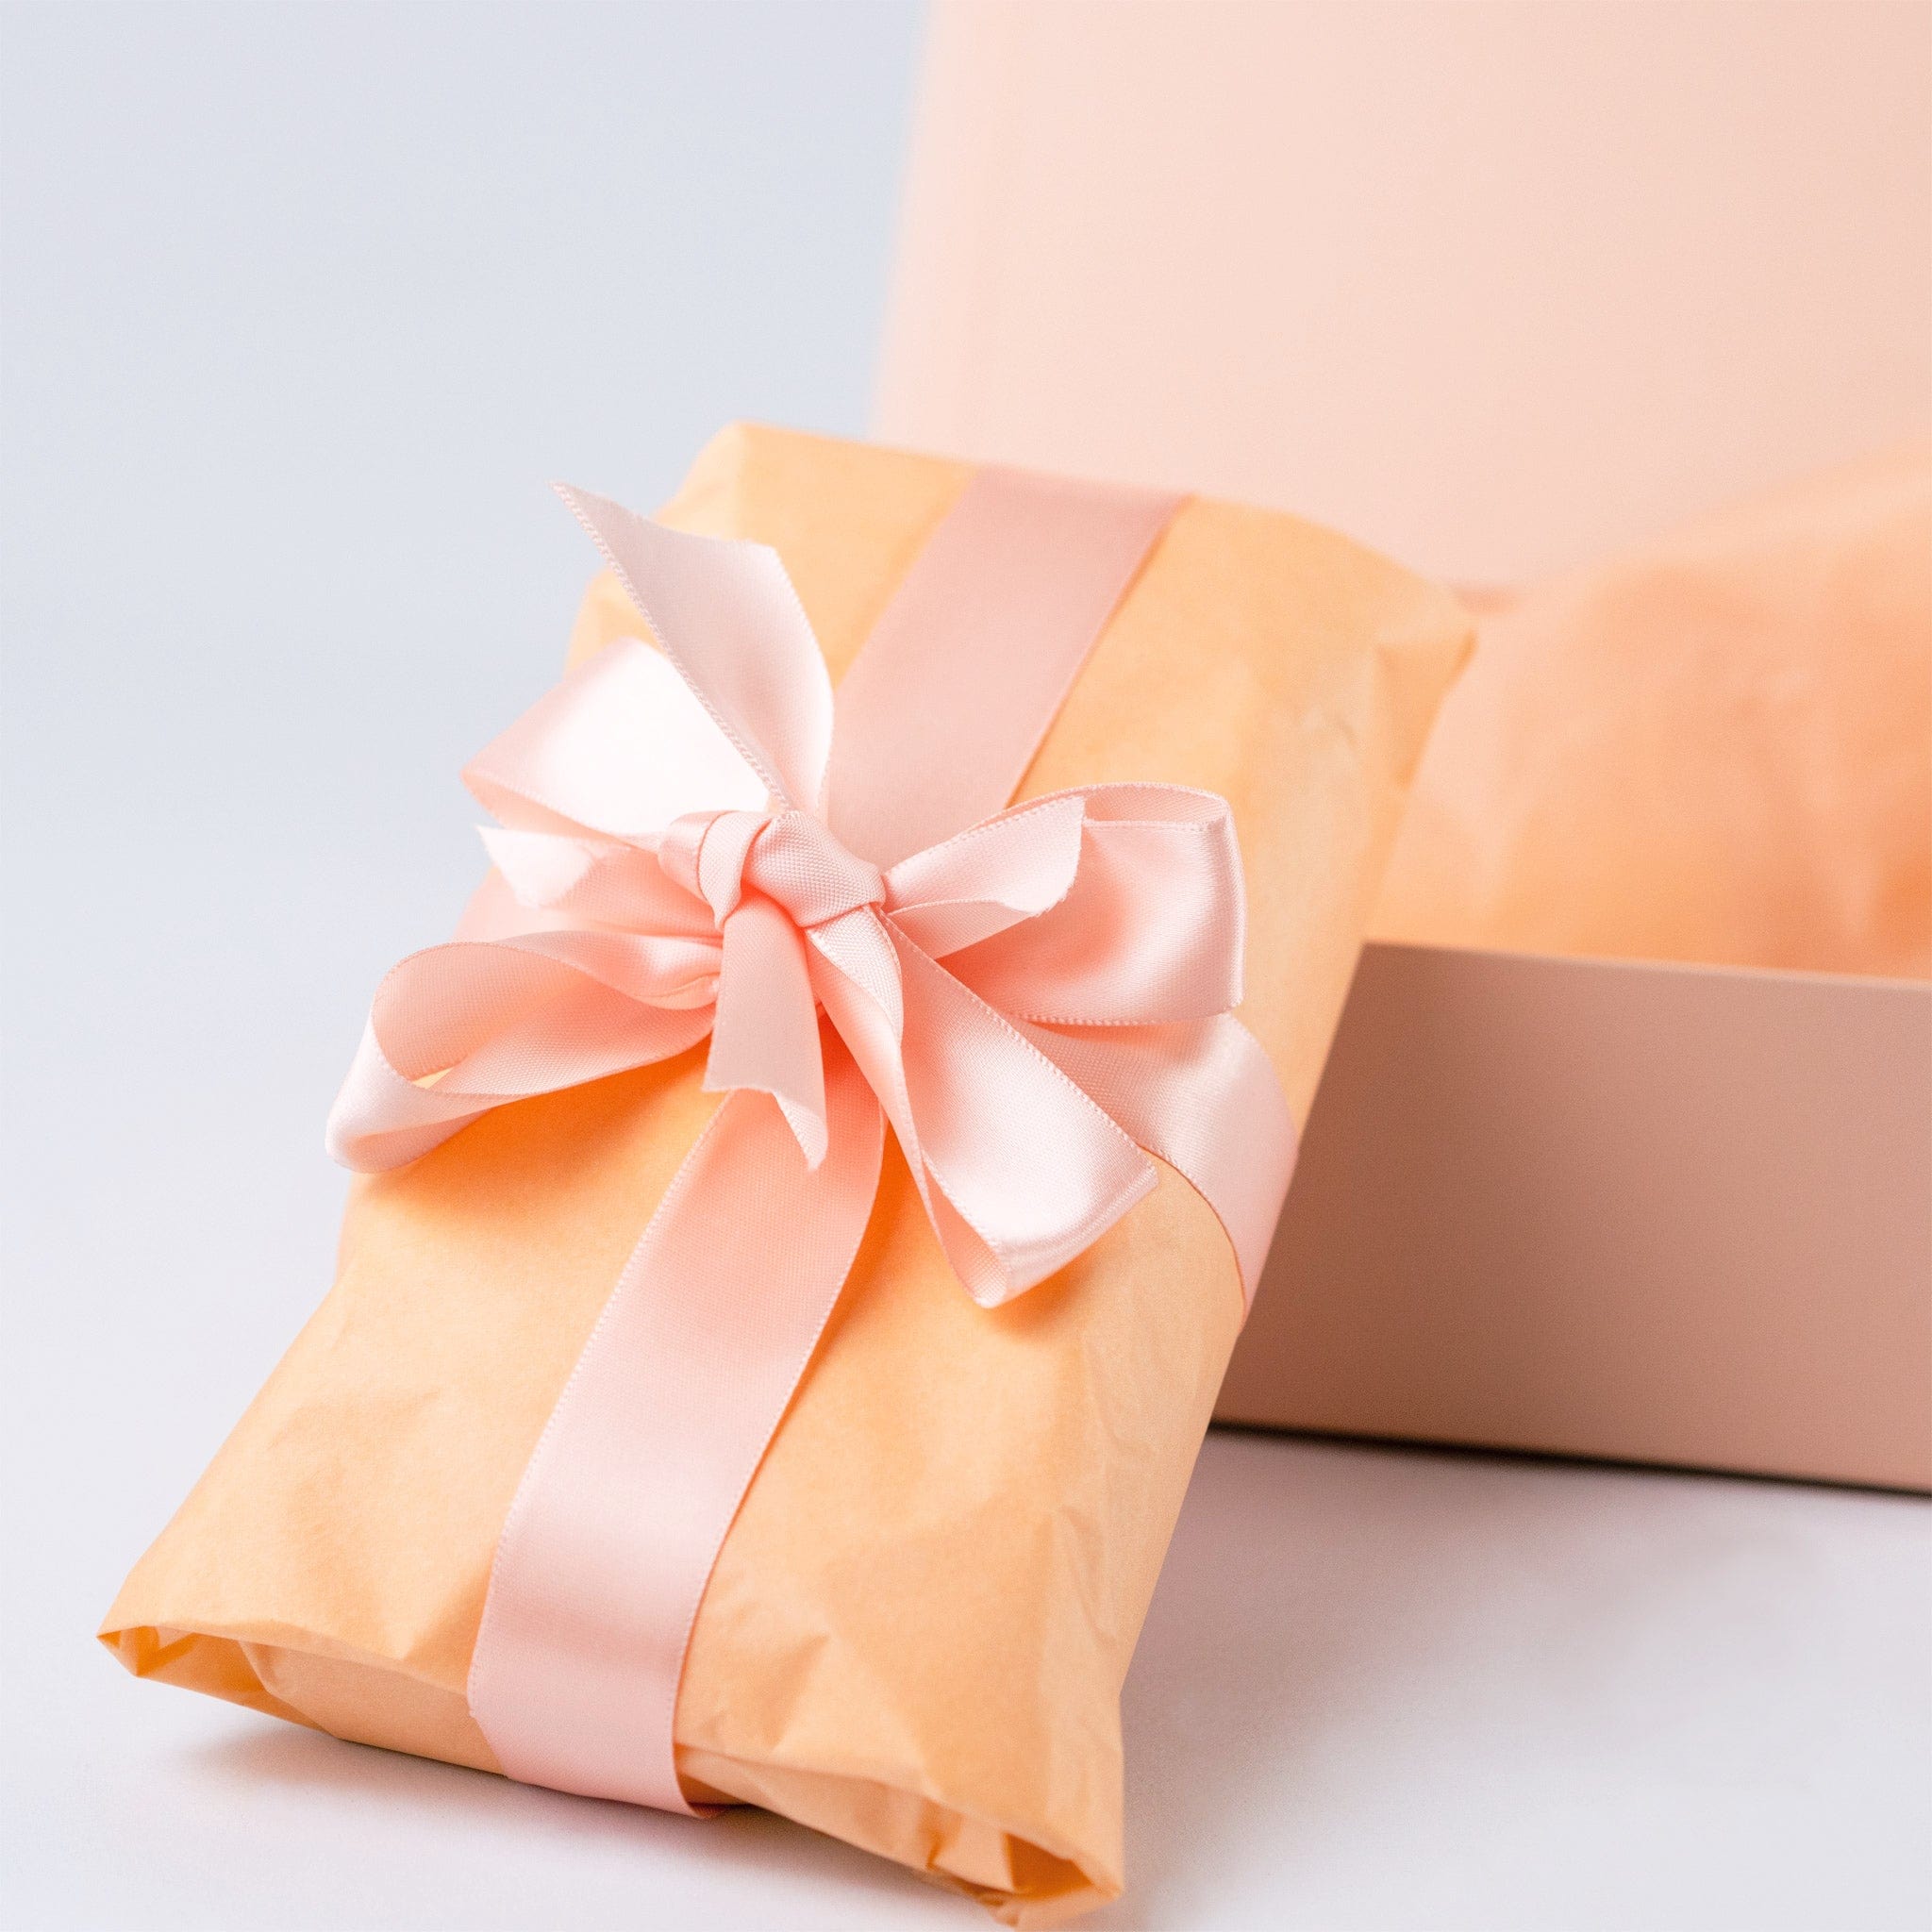 NE000183 NEON Acid-Free Tissue Paper - Peach is use for gift wrapping with satin ribbon.